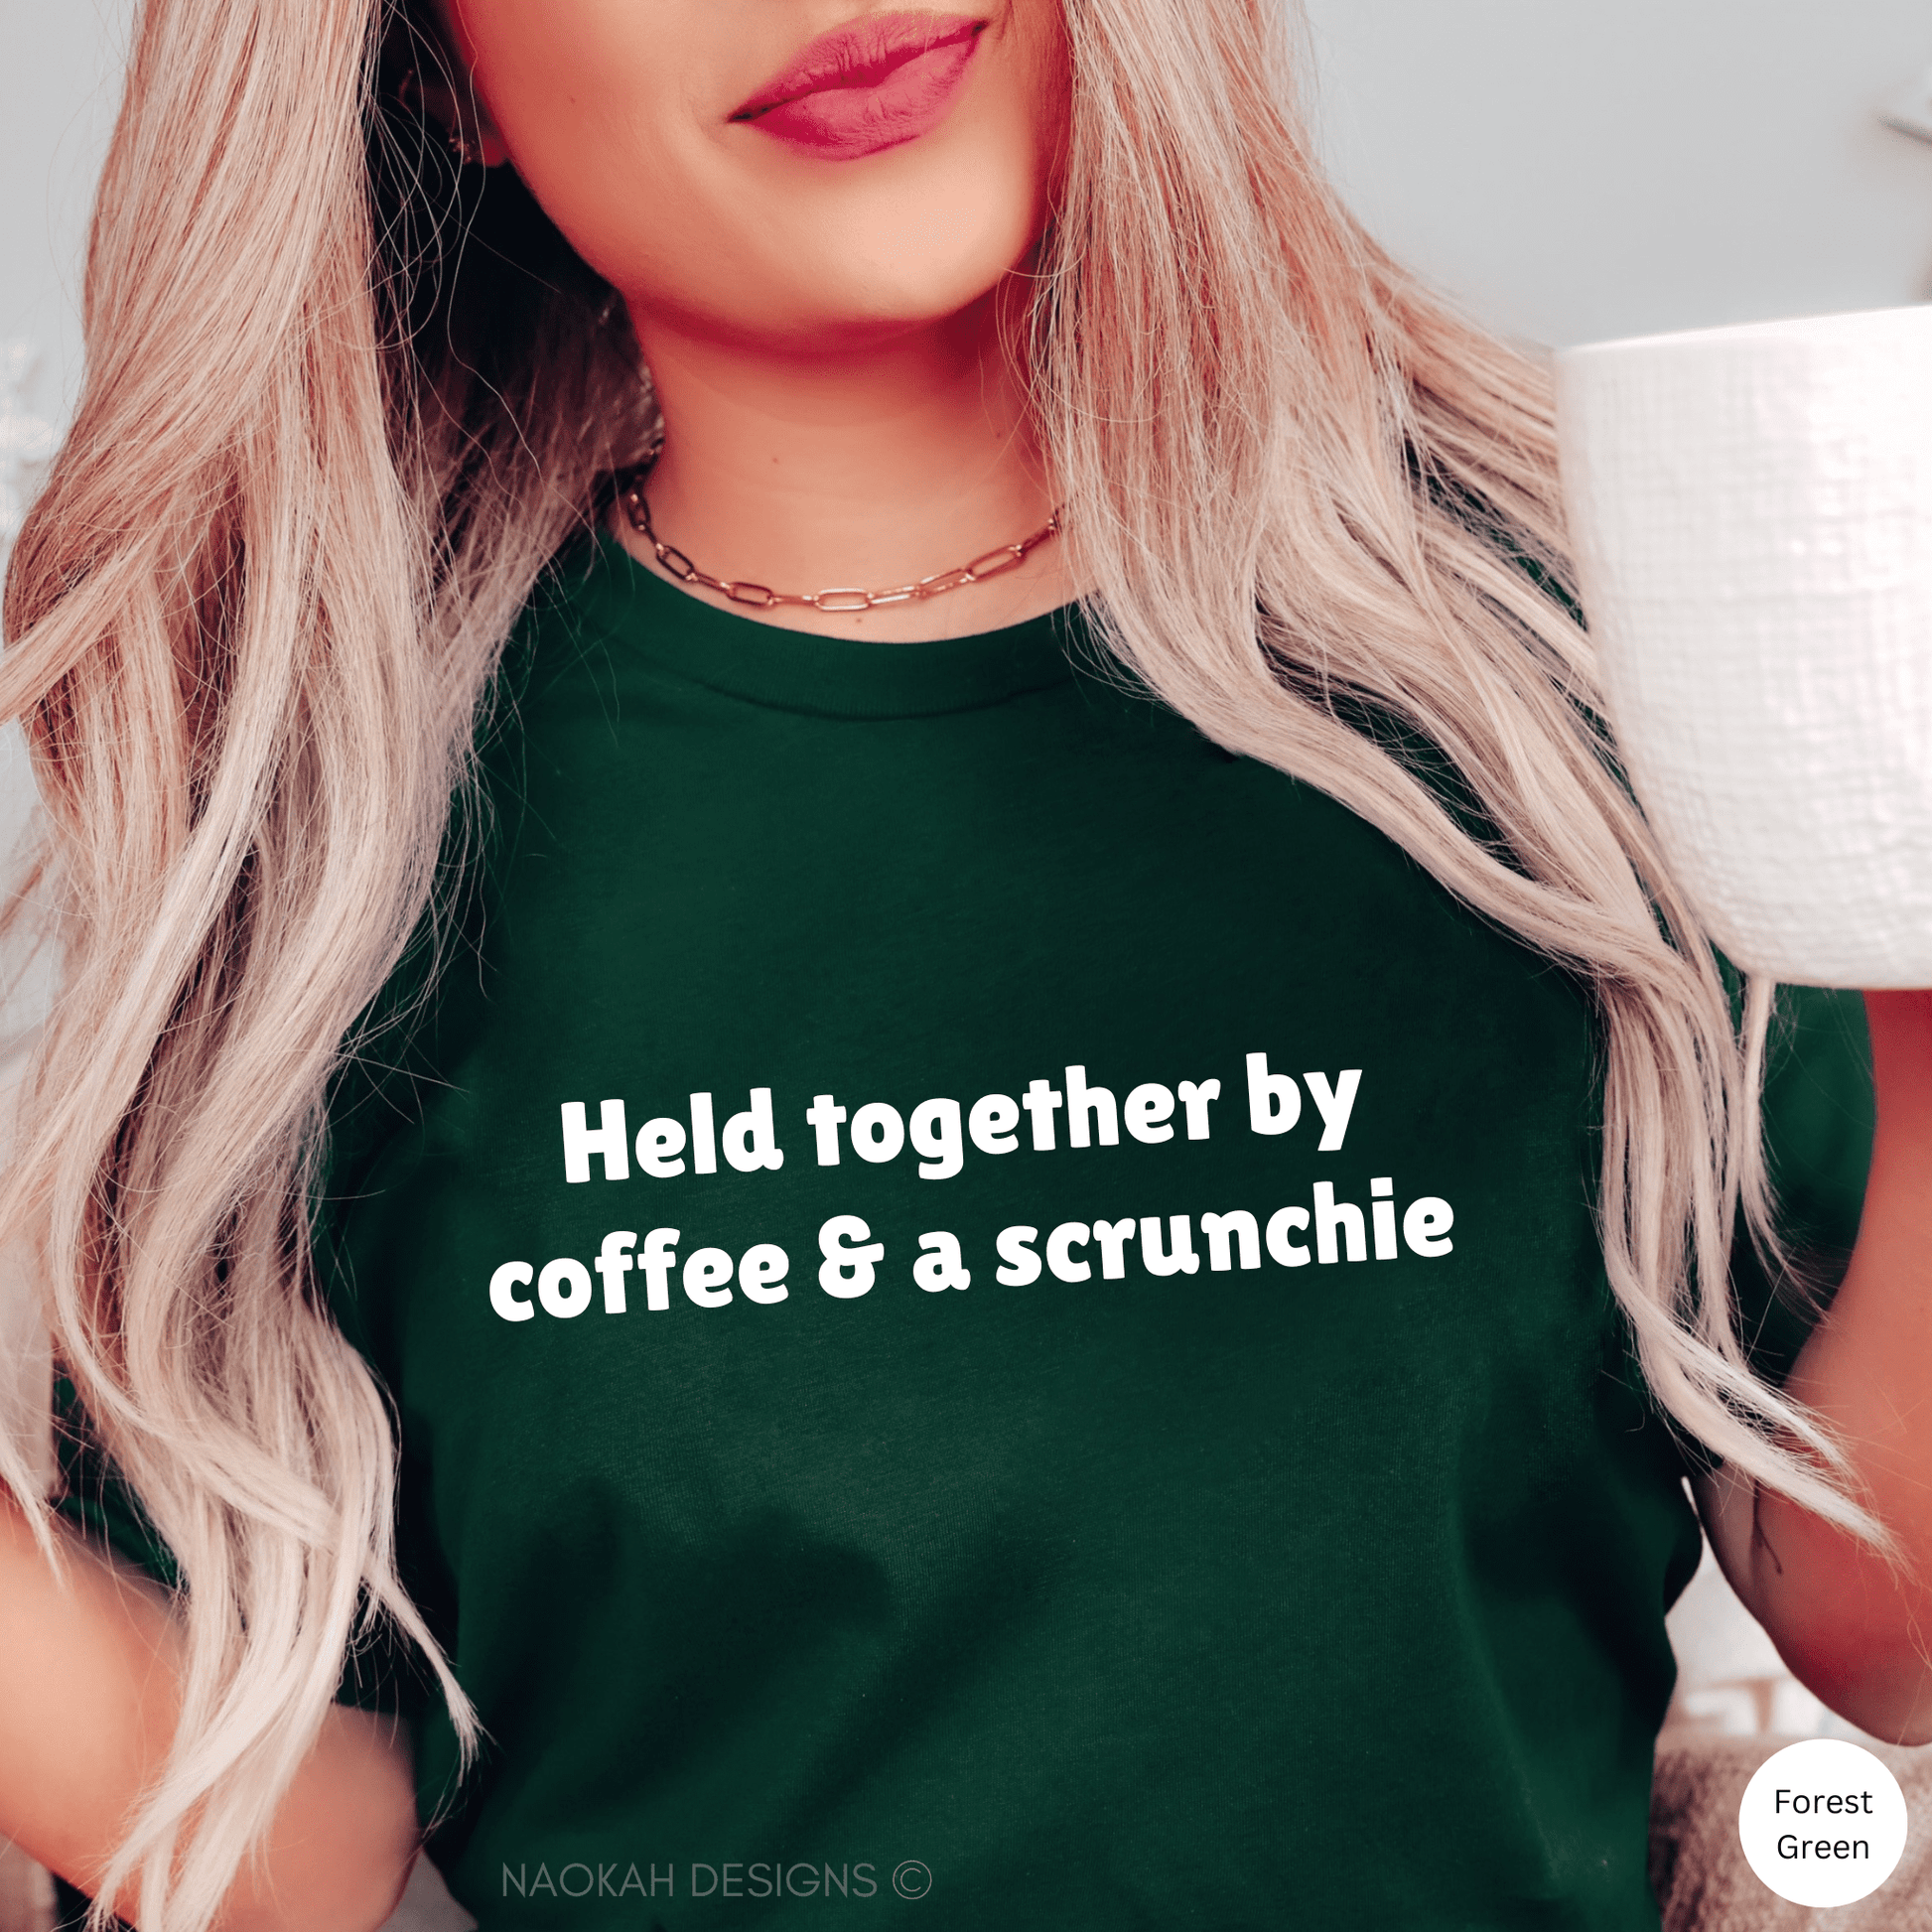 Held Together By Coffee and a Scrunchie Shirt, Coffee Shirt, Summer Tee, Coffee Lover Shirt, Barista Shirt, Iced Coffee Addict Shirt, coffee scrunchie, coffee-colored scrunchie, coffee-colored hair tie, coffee-colored elastic hair tie, coffee hair accessory, elastic hair tie with coffee print, scrunchy with coffee color, scrunchies with coffee motif, coffee colored hair scrunchies, coffee hair scrunchie